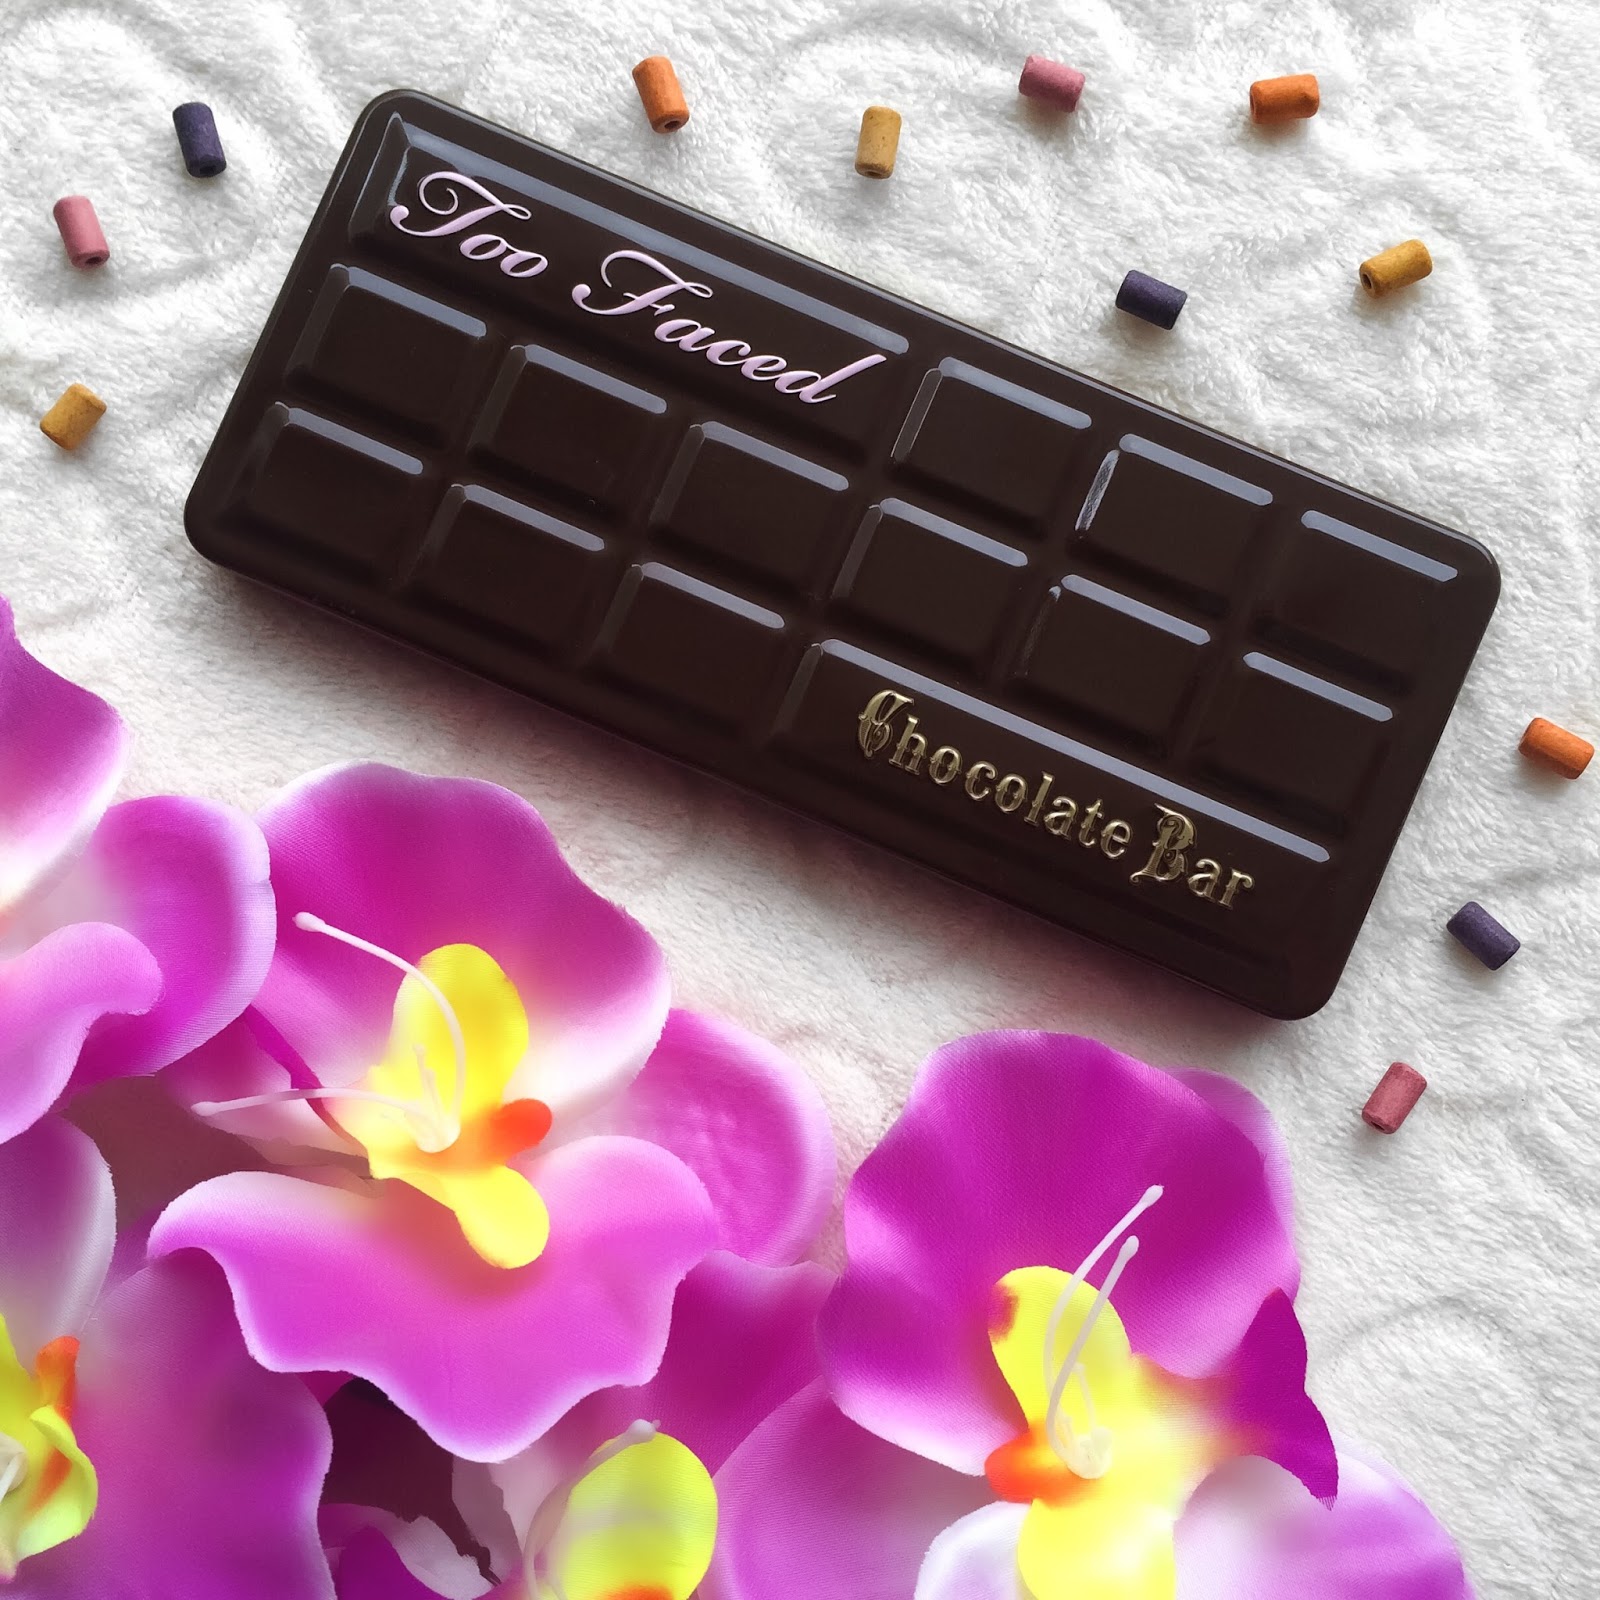 Review & Swatches Too Faced Chocolate Bar Eyeshadow